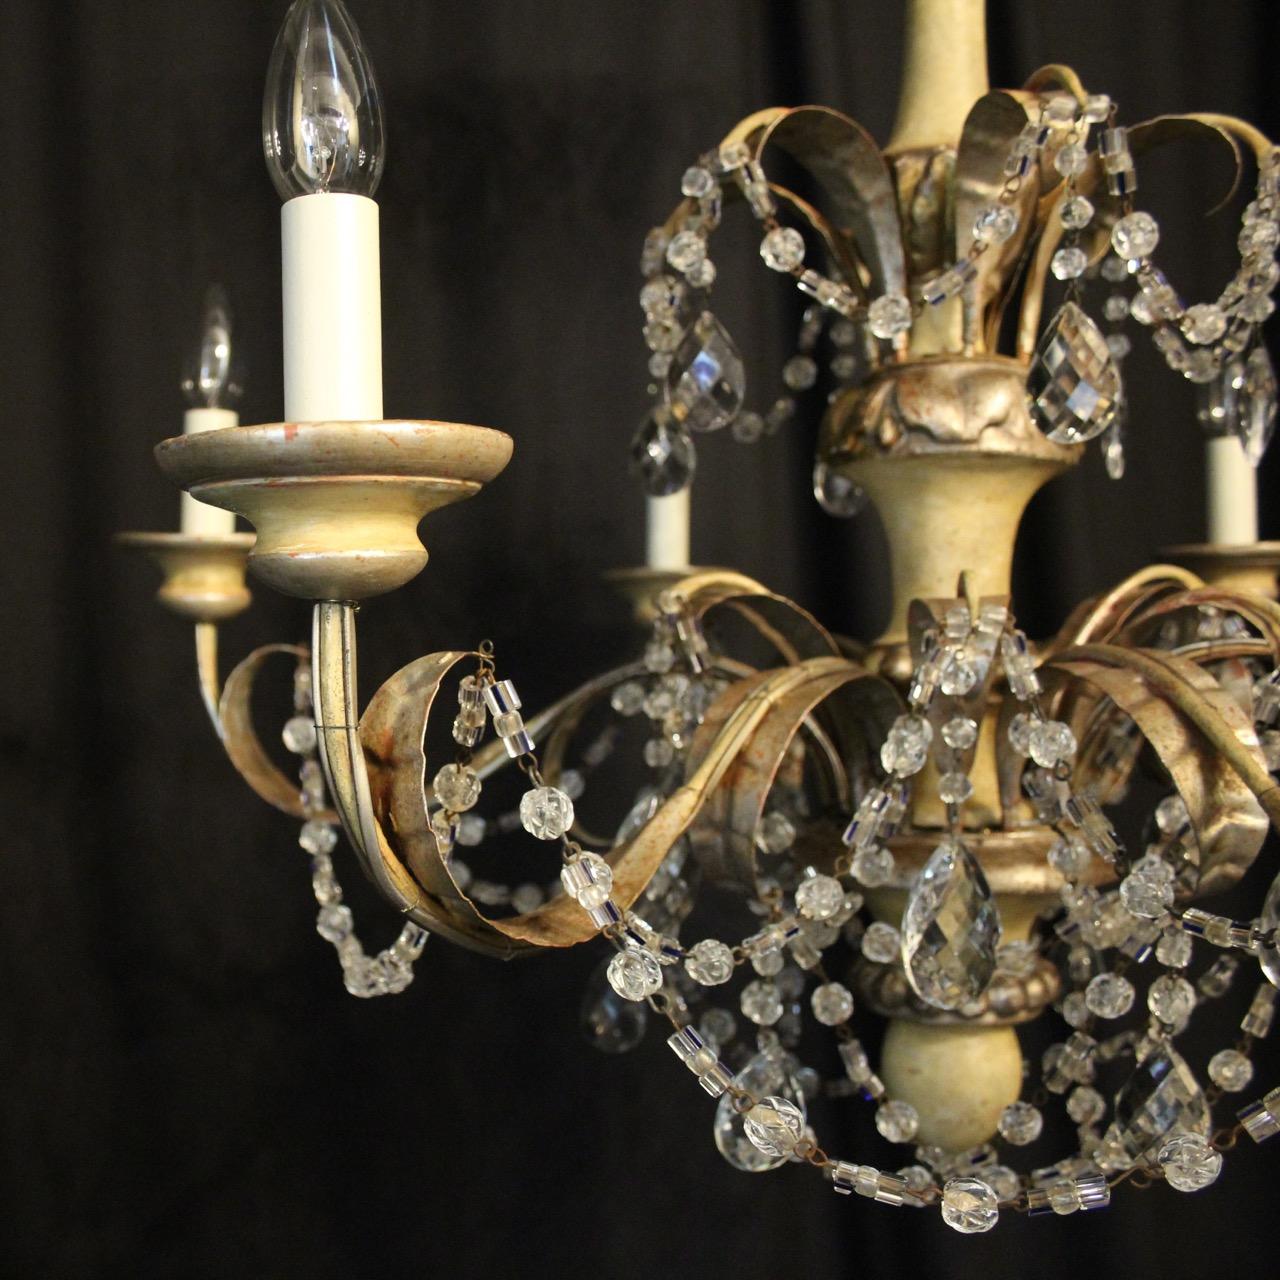 A decorative Italian giltwood and toleware 6-light antique chandelier, the silver gilded metal leaf scrolling arms with wooden bulbous bobeche drip pans, issuing from a cream painted wooden baluster knopped central column with floral silver toleware